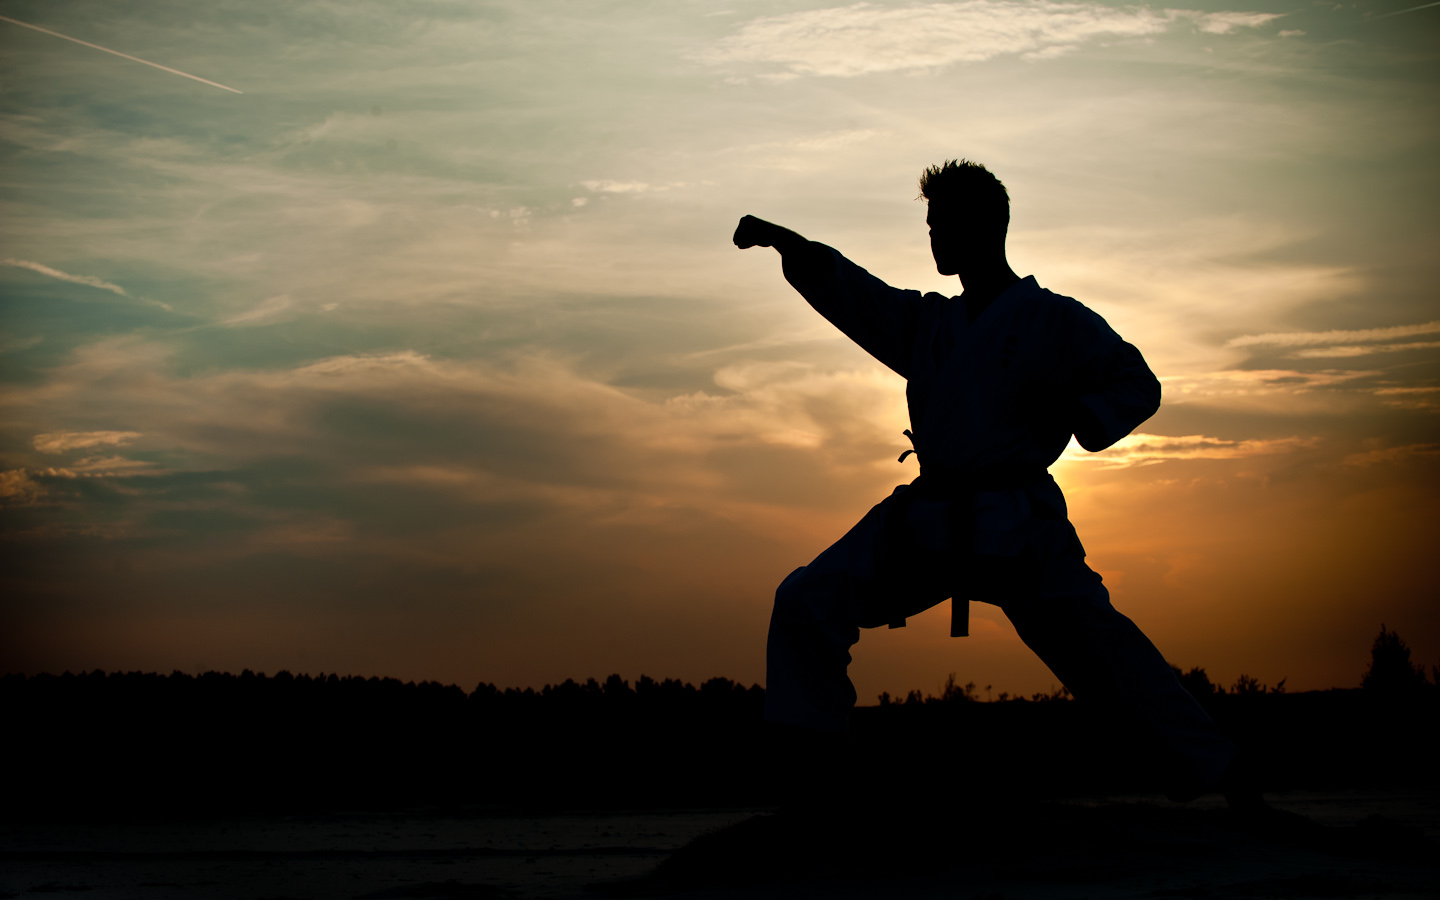 karate kid wallpaper,people in nature,kung fu,sky,silhouette,t'ai chi ch'uan